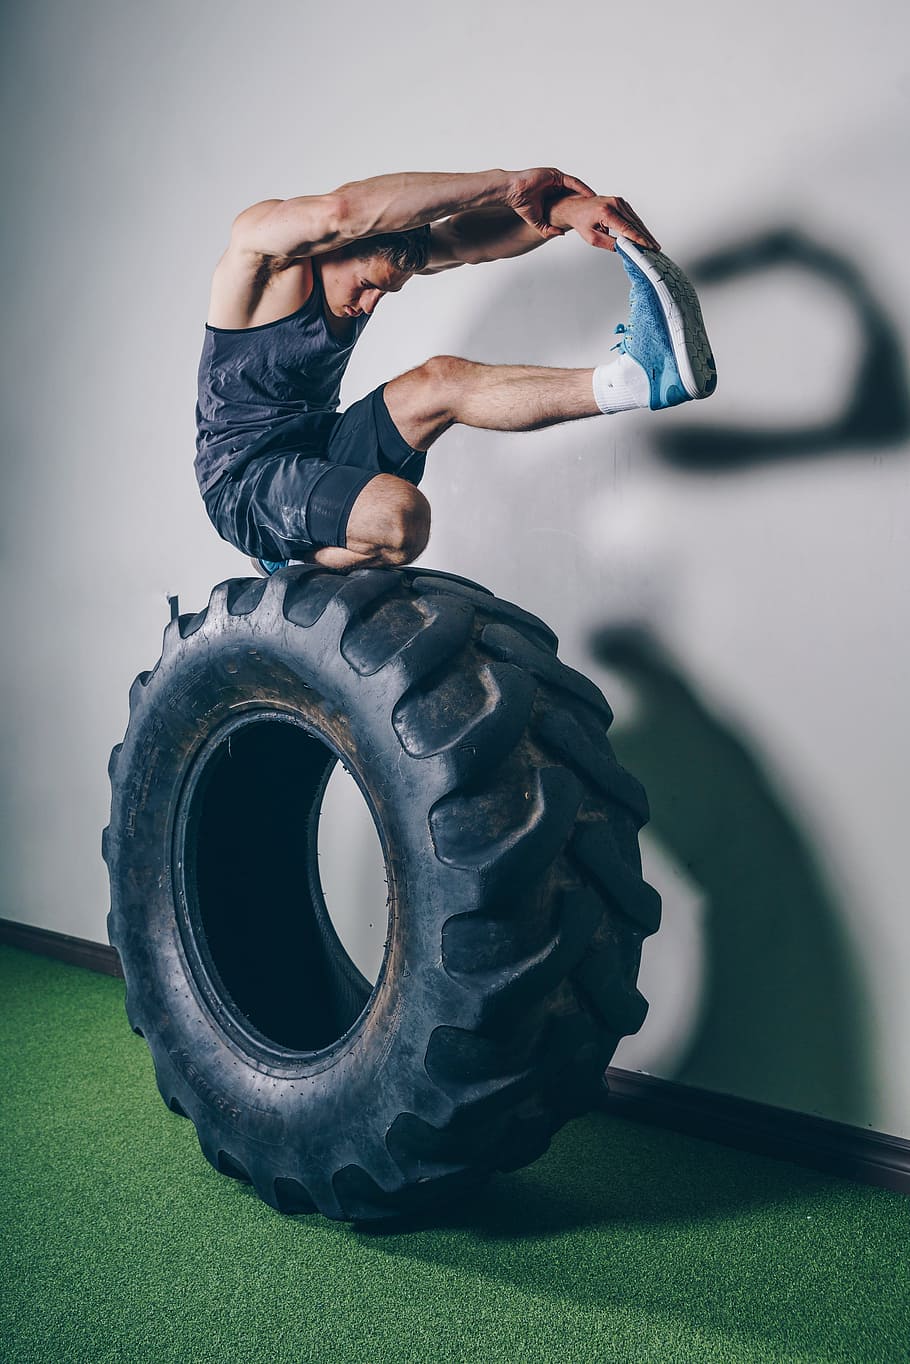 Stretching On Tire Photo, Fitness, Men, Sports, Gym, Exercise